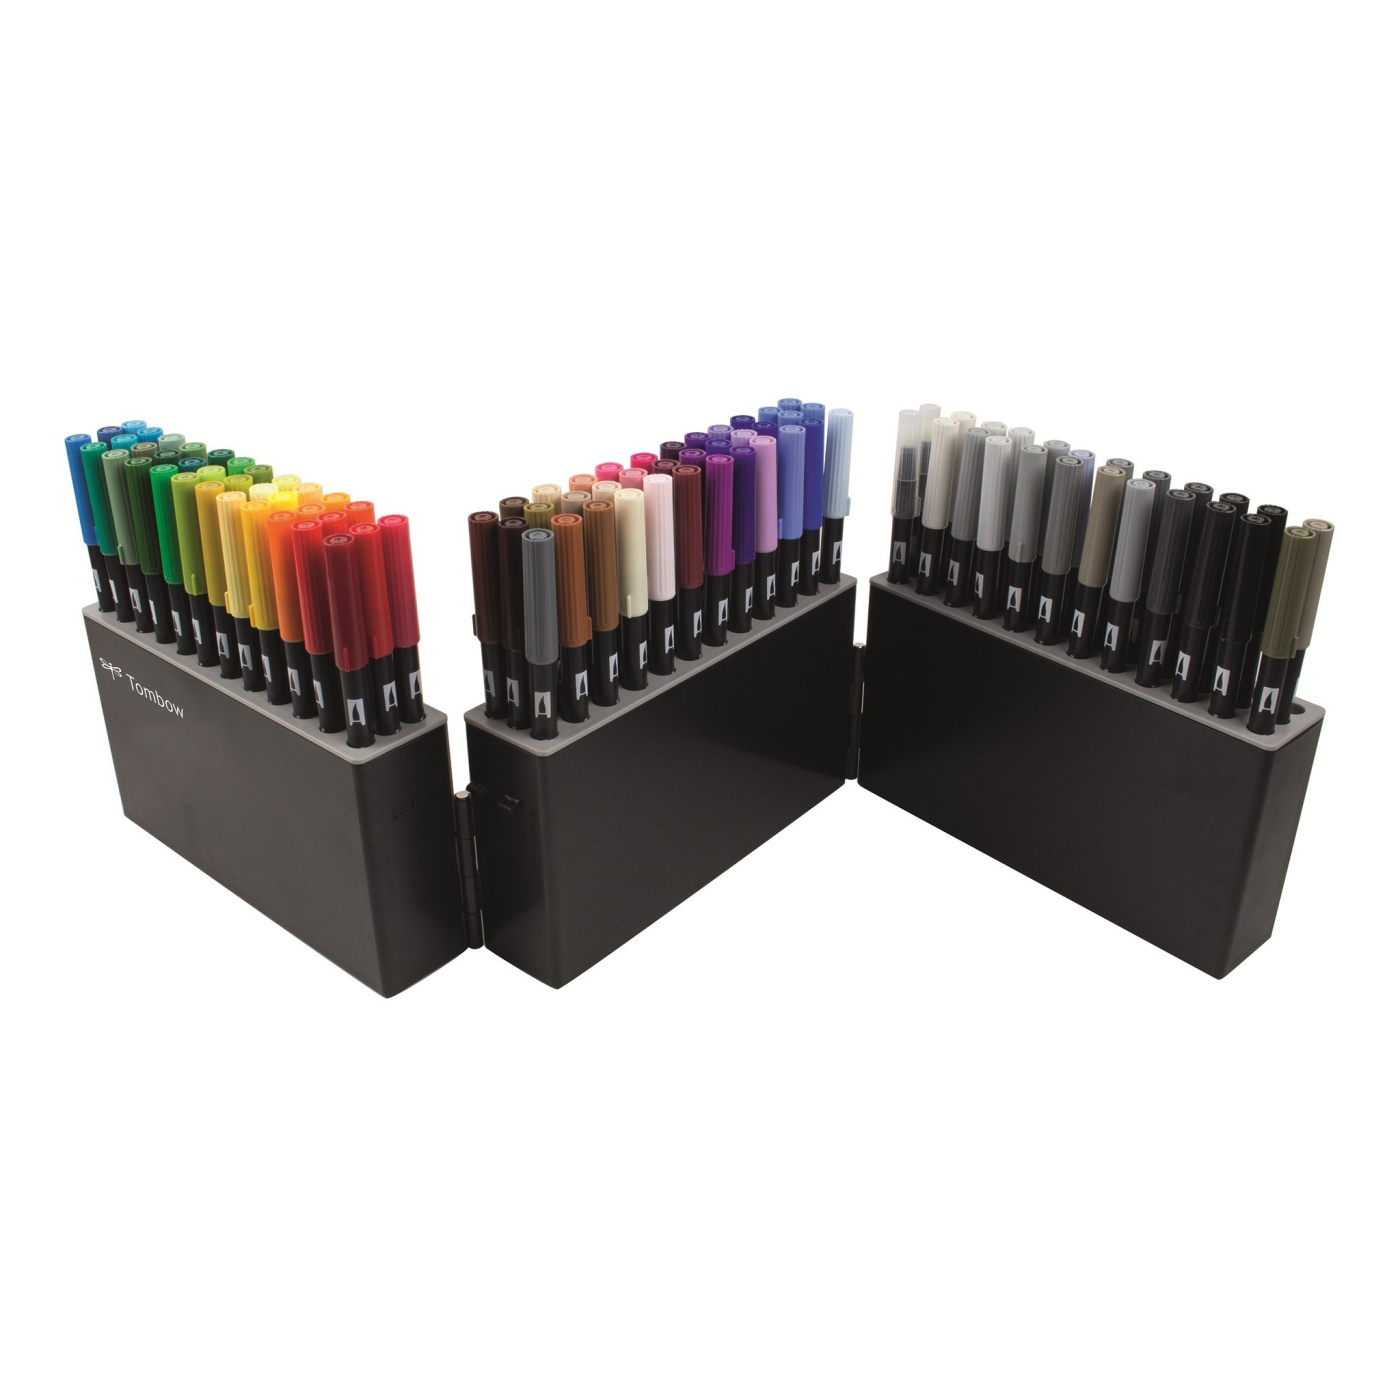 ABT Dual Brush Pen Box Case 108 Set in the group Pens / Product series / ABT Dual Brush at Voorcrea (101109)